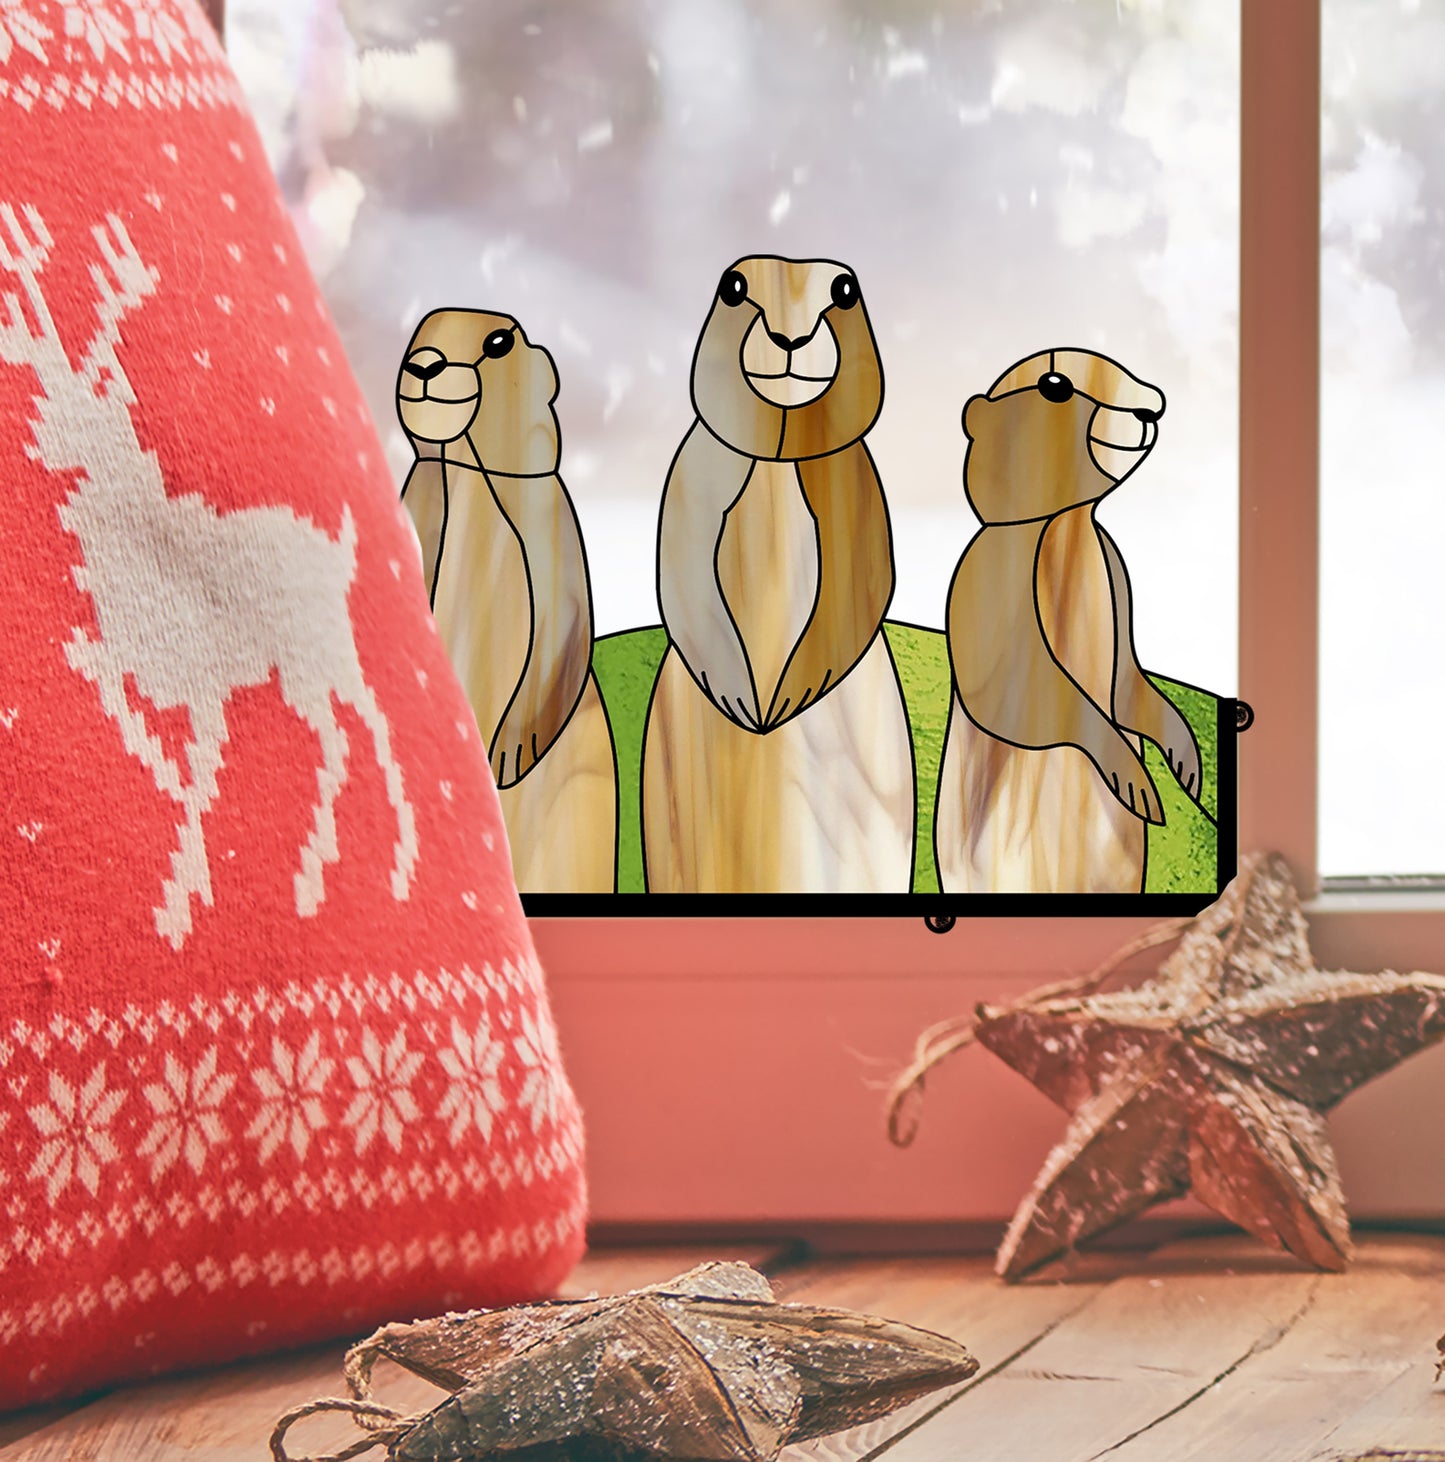 prairie dog stained glass pattern, instant pdf, shown in window with christmas decorations